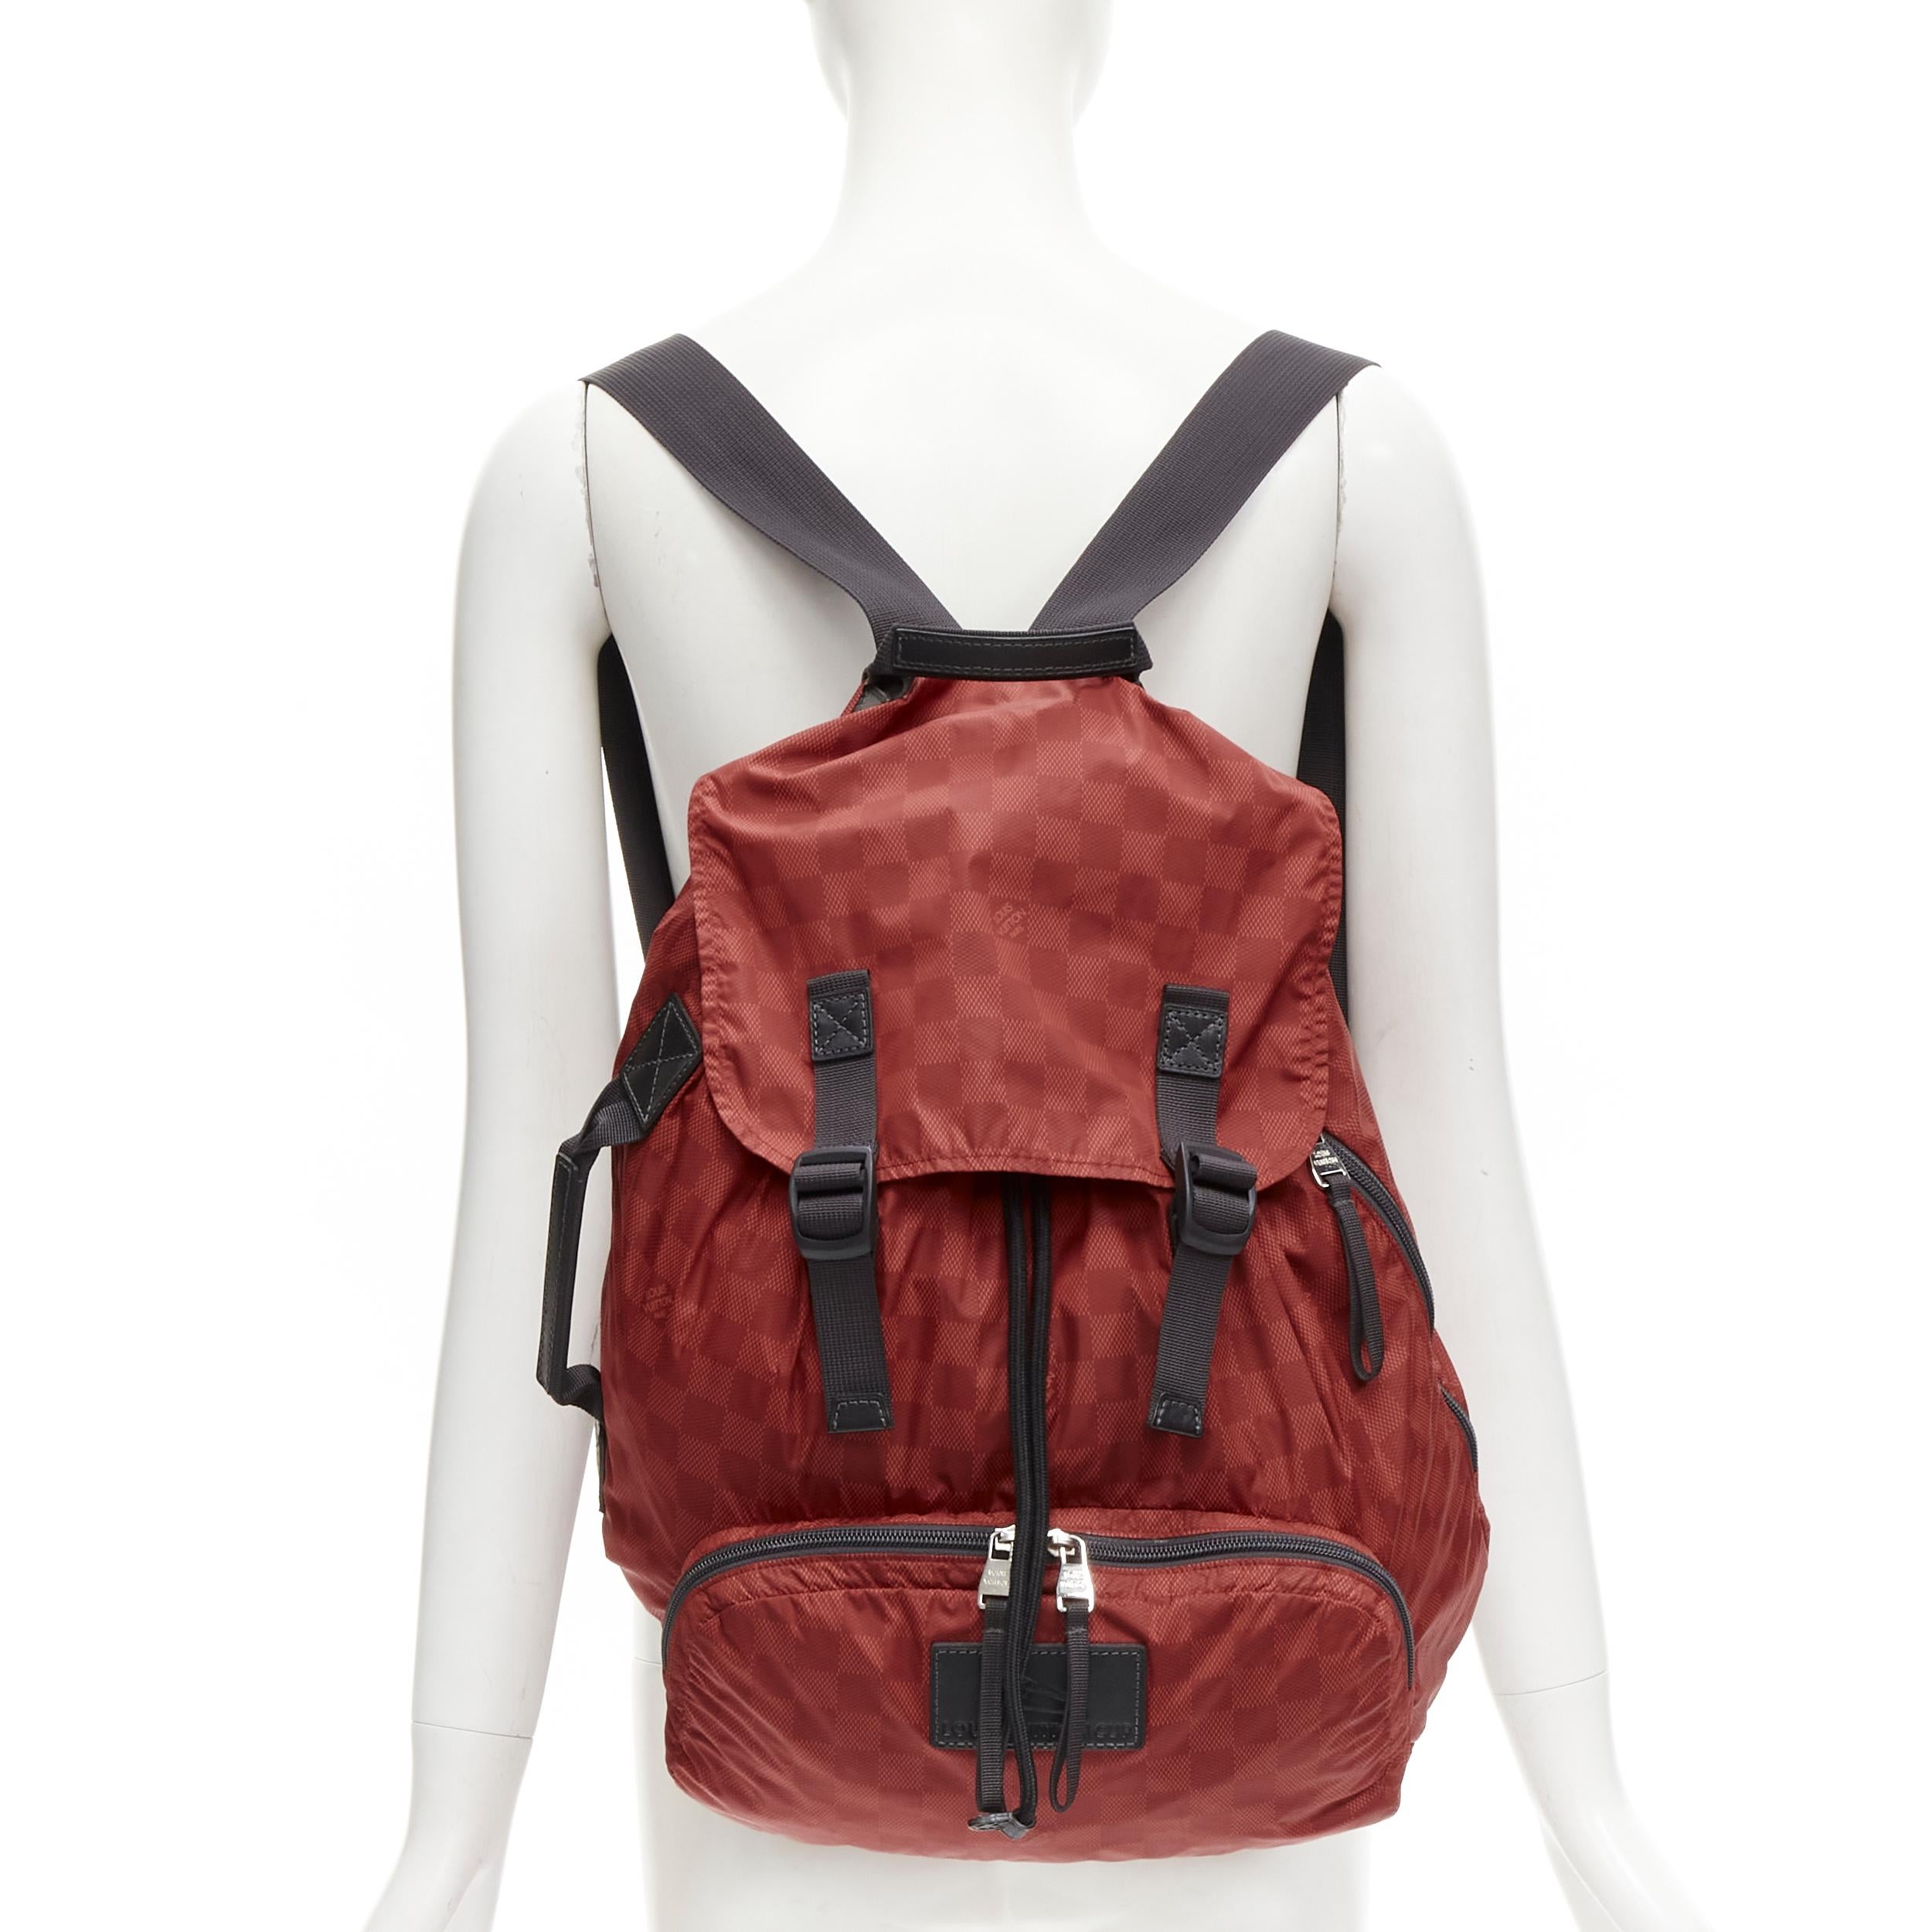 LOUIS VUITTON Cup 2012 red LV Damier nylon foldable backpack
Reference: CNLE/A00195
Brand: Louis Vuitton
Designer: Marc Jacobs
Collection: Cup 2012
Material: Nylon, Leather
Color: Red
Pattern: Checkered
Closure: Drawstring
Lining: Red Fabric
Extra